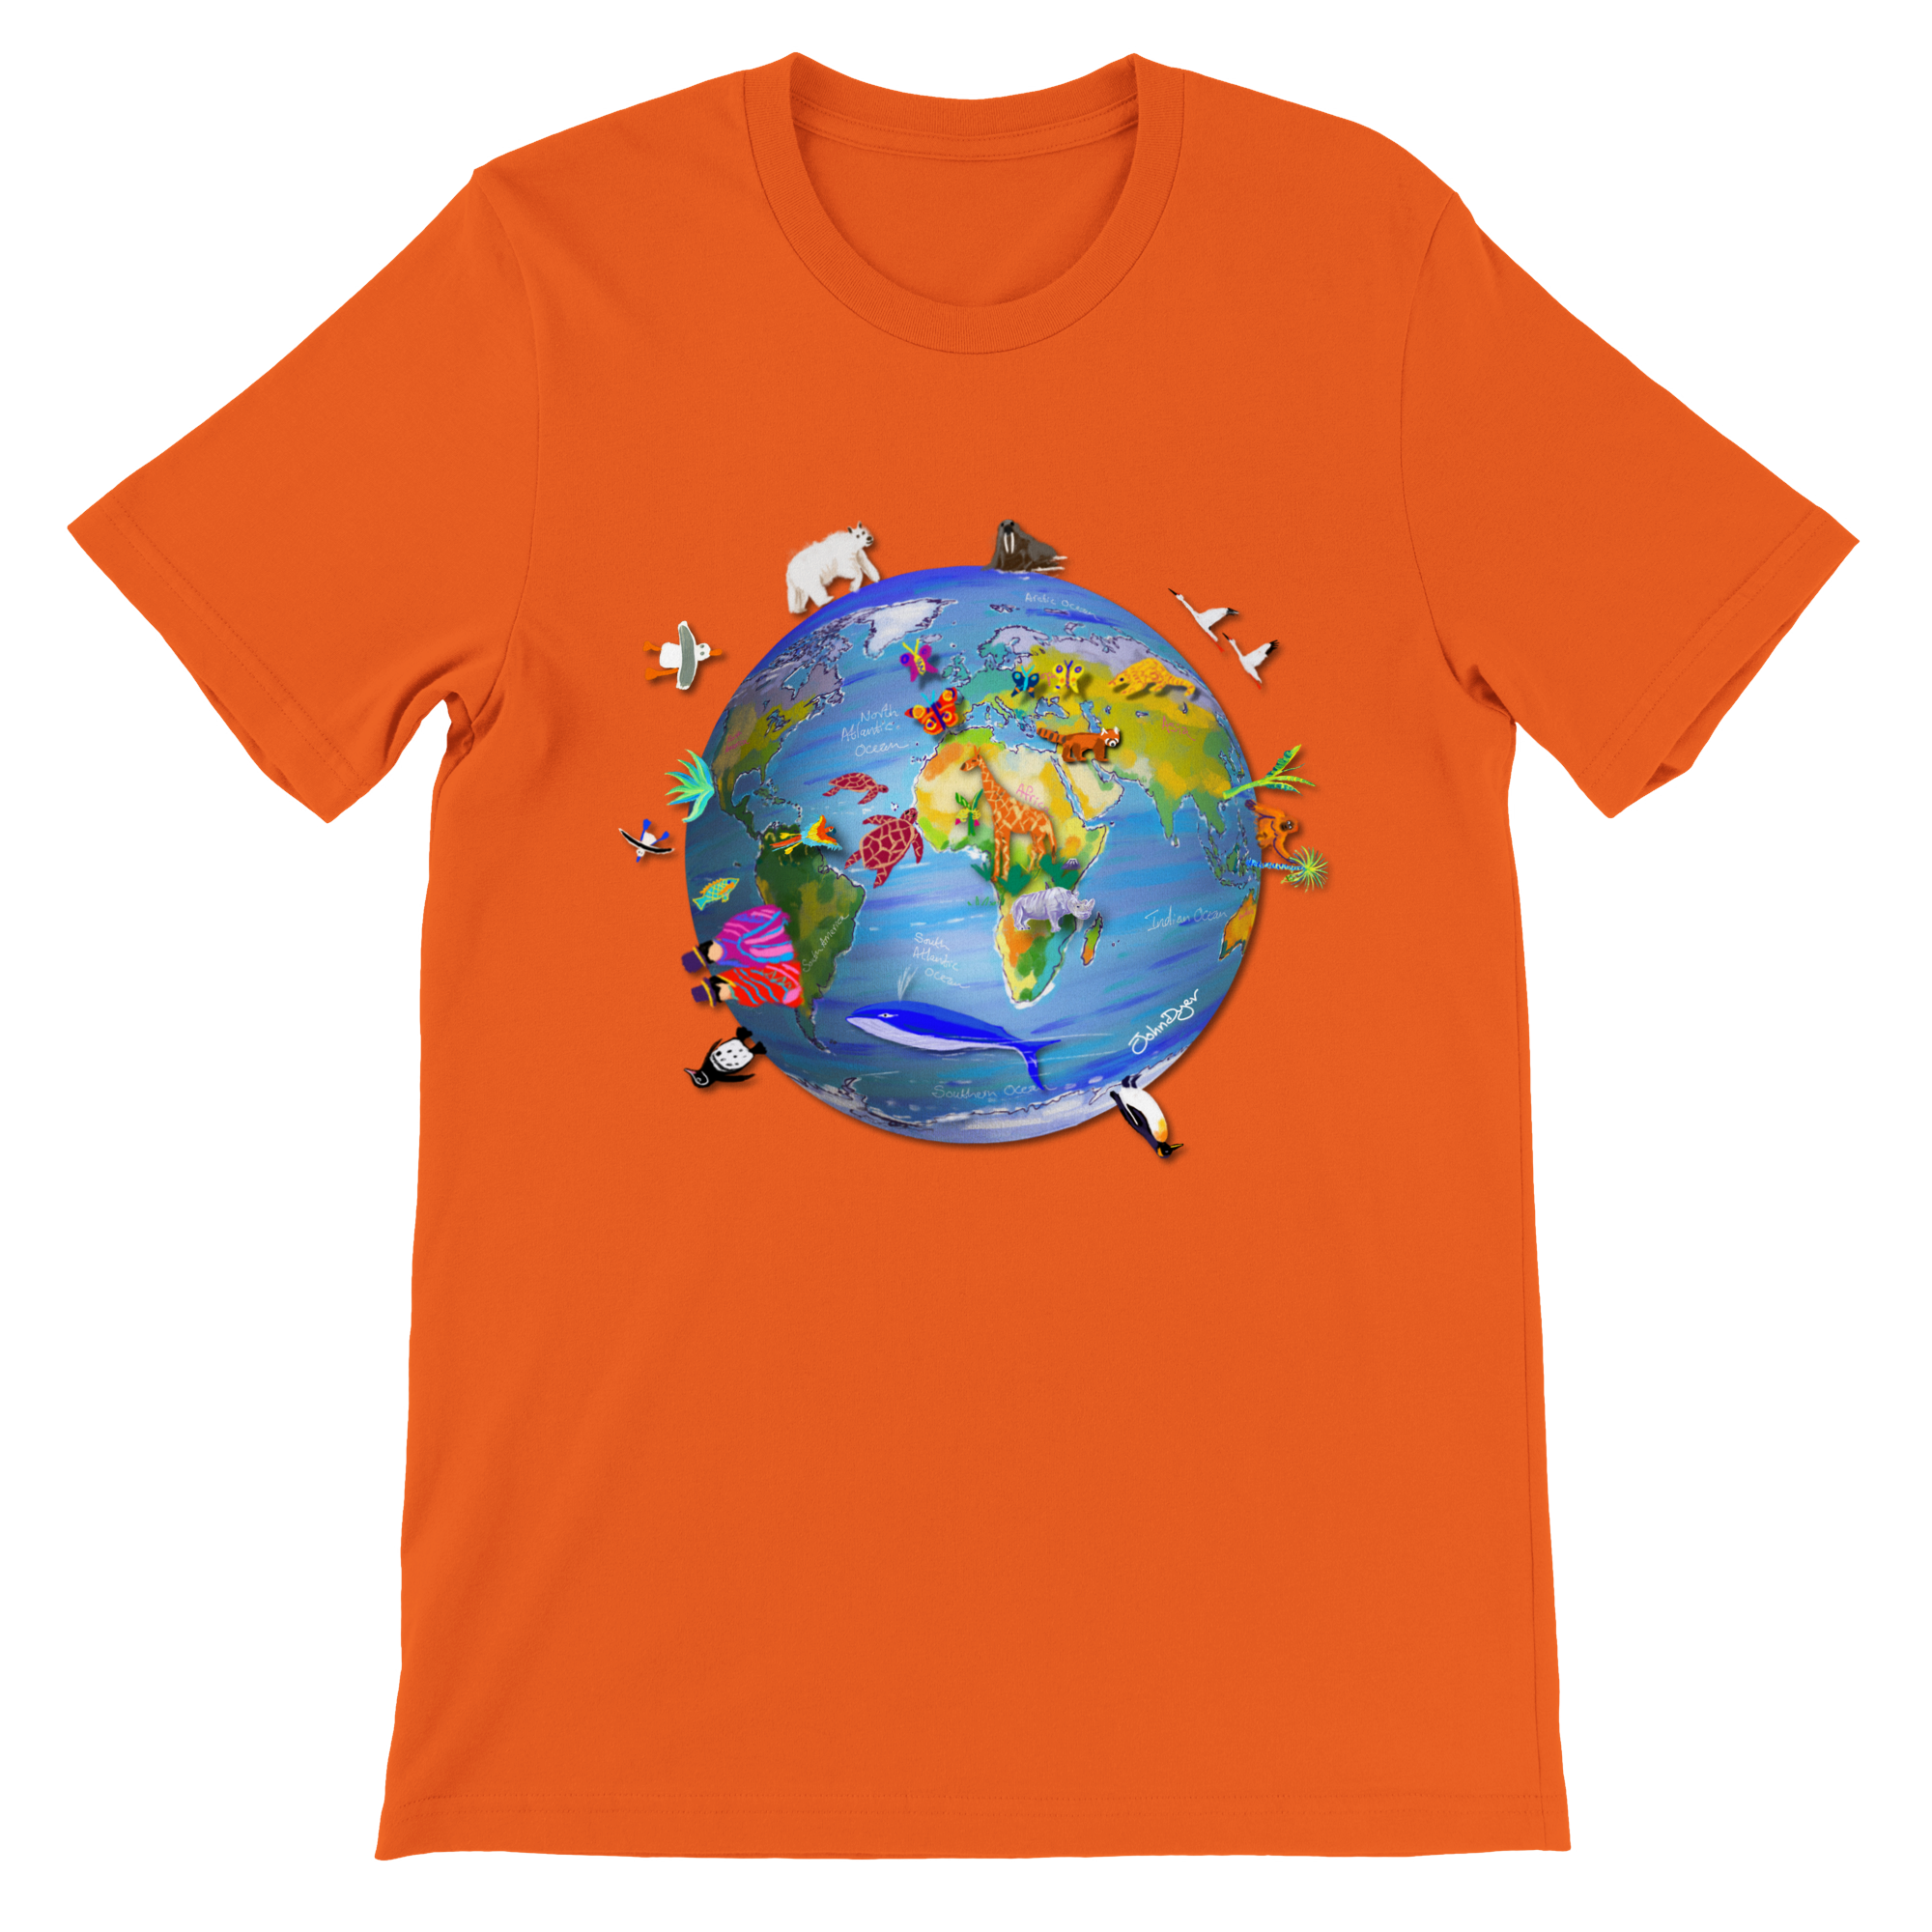 Earth T-Shirt featuring art from John Dyer of planet earth, climate change and wildlife. This fantastic art earth t-shirt features a drawing of planet earth with endangered animals and environments. Unisex and eco-friendly. Free worldwide delivery.